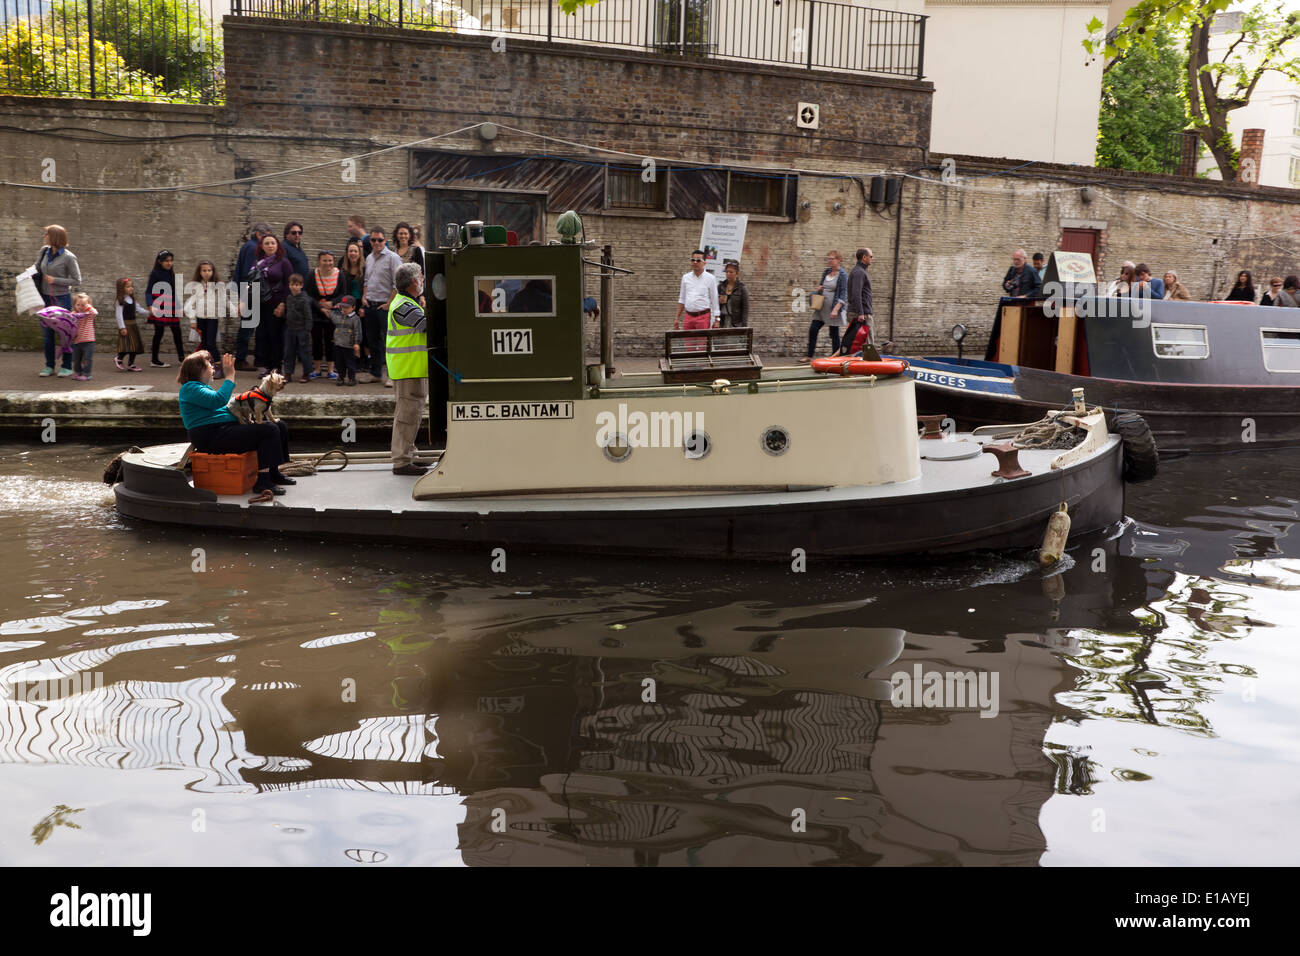 Image of  M.S.C. Bantam 1, an historic Tug on display at the Canalway Cavalcade, Little Venice 2014 Stock Photo